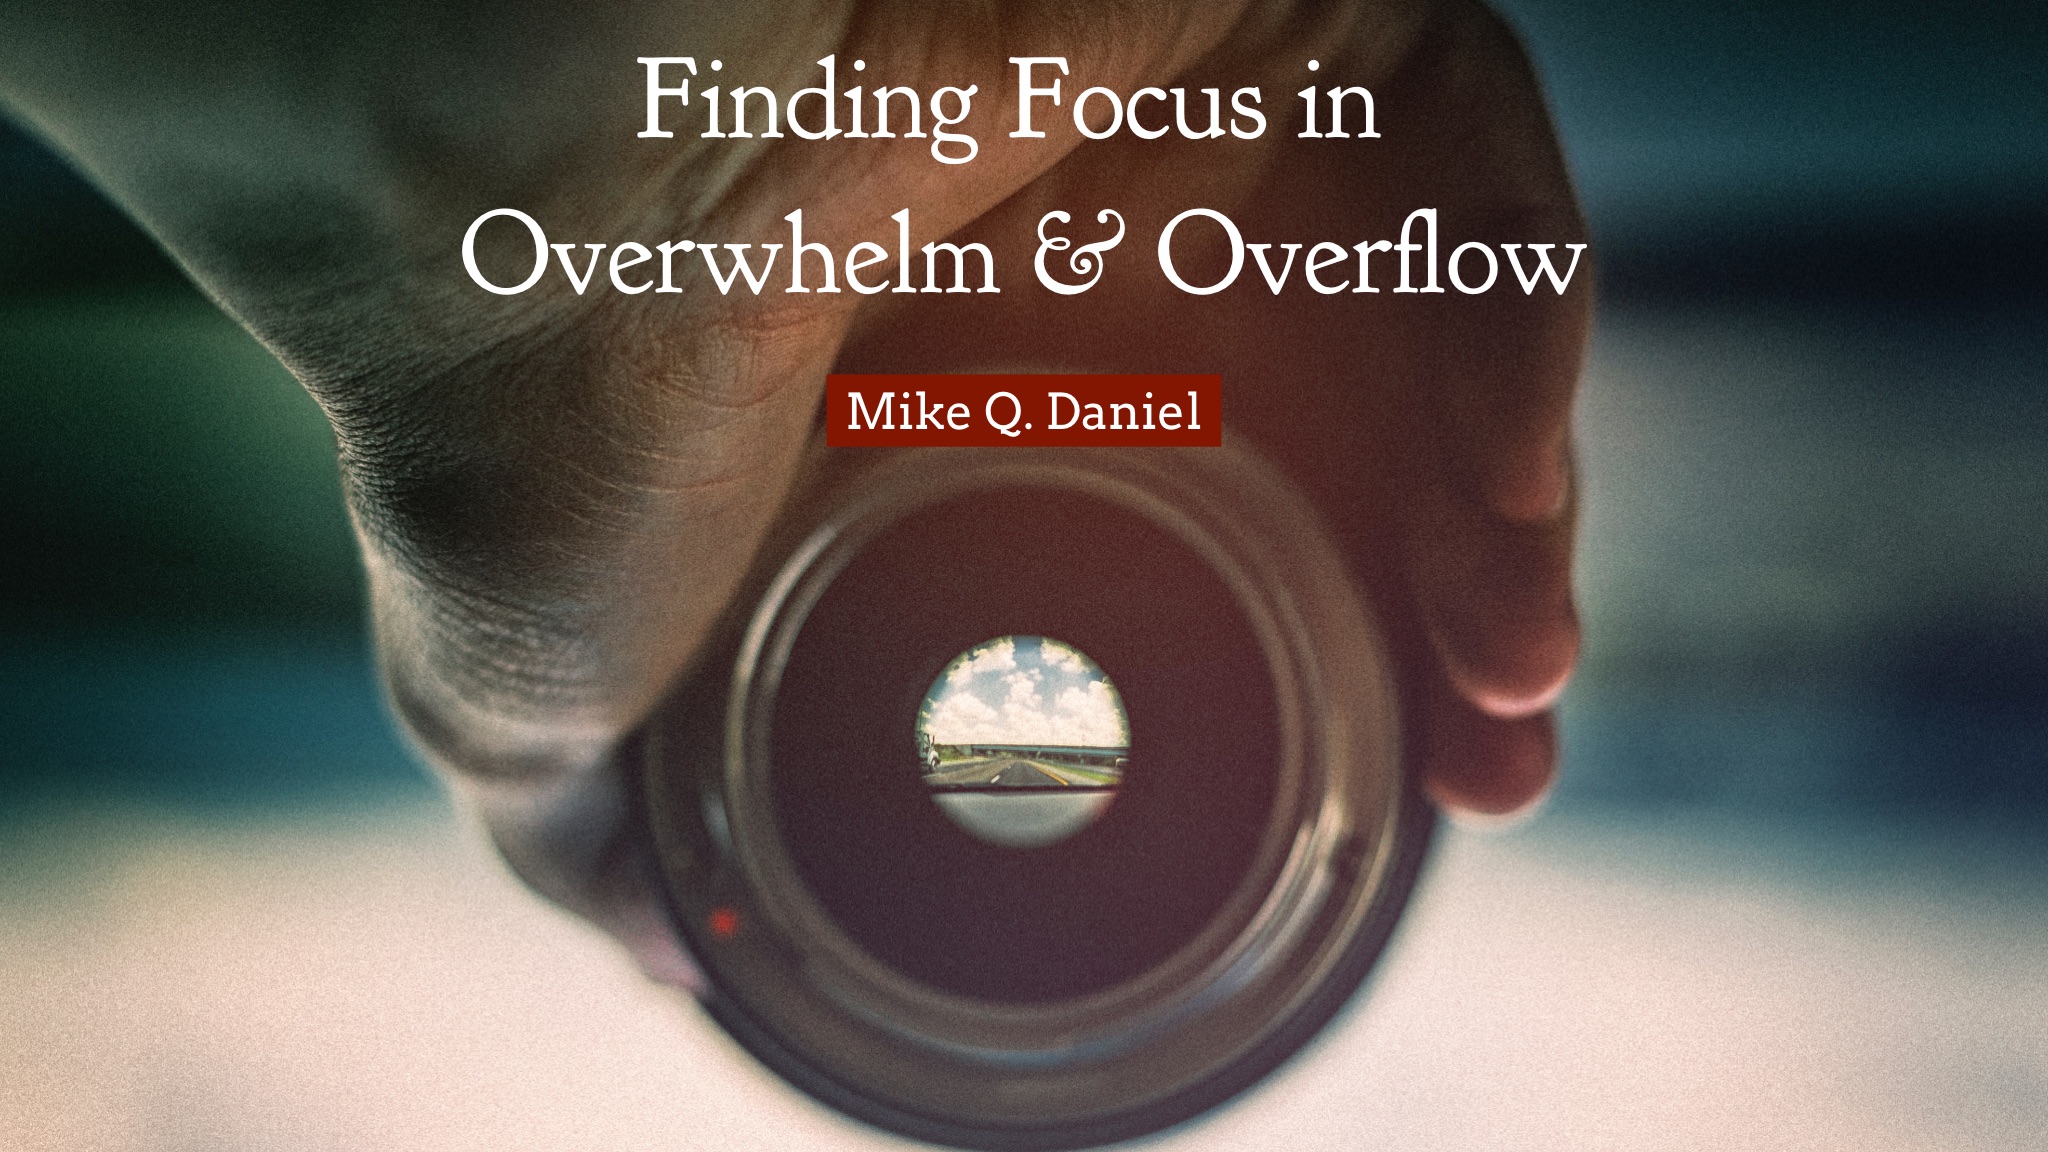 Finding Focus in the Overwhelm & Overflow